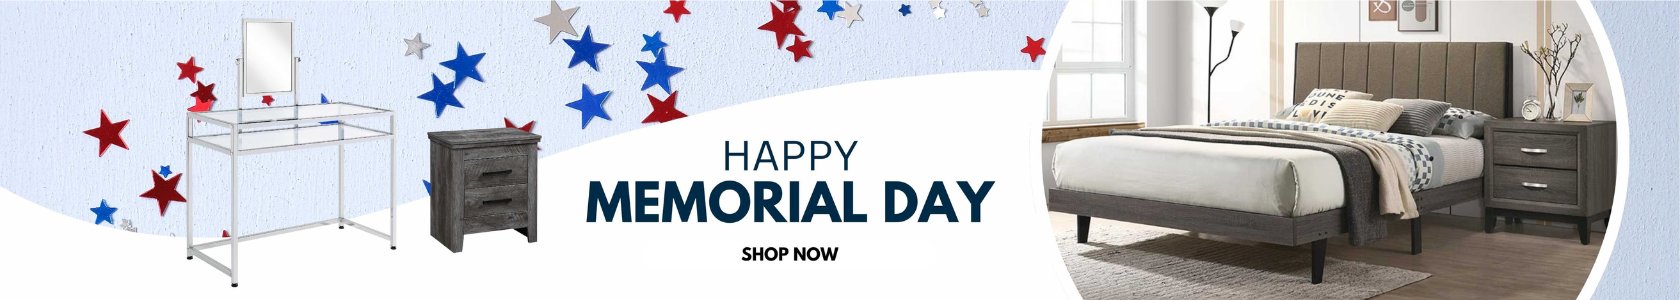 Memorial Day Sale by ACME banner